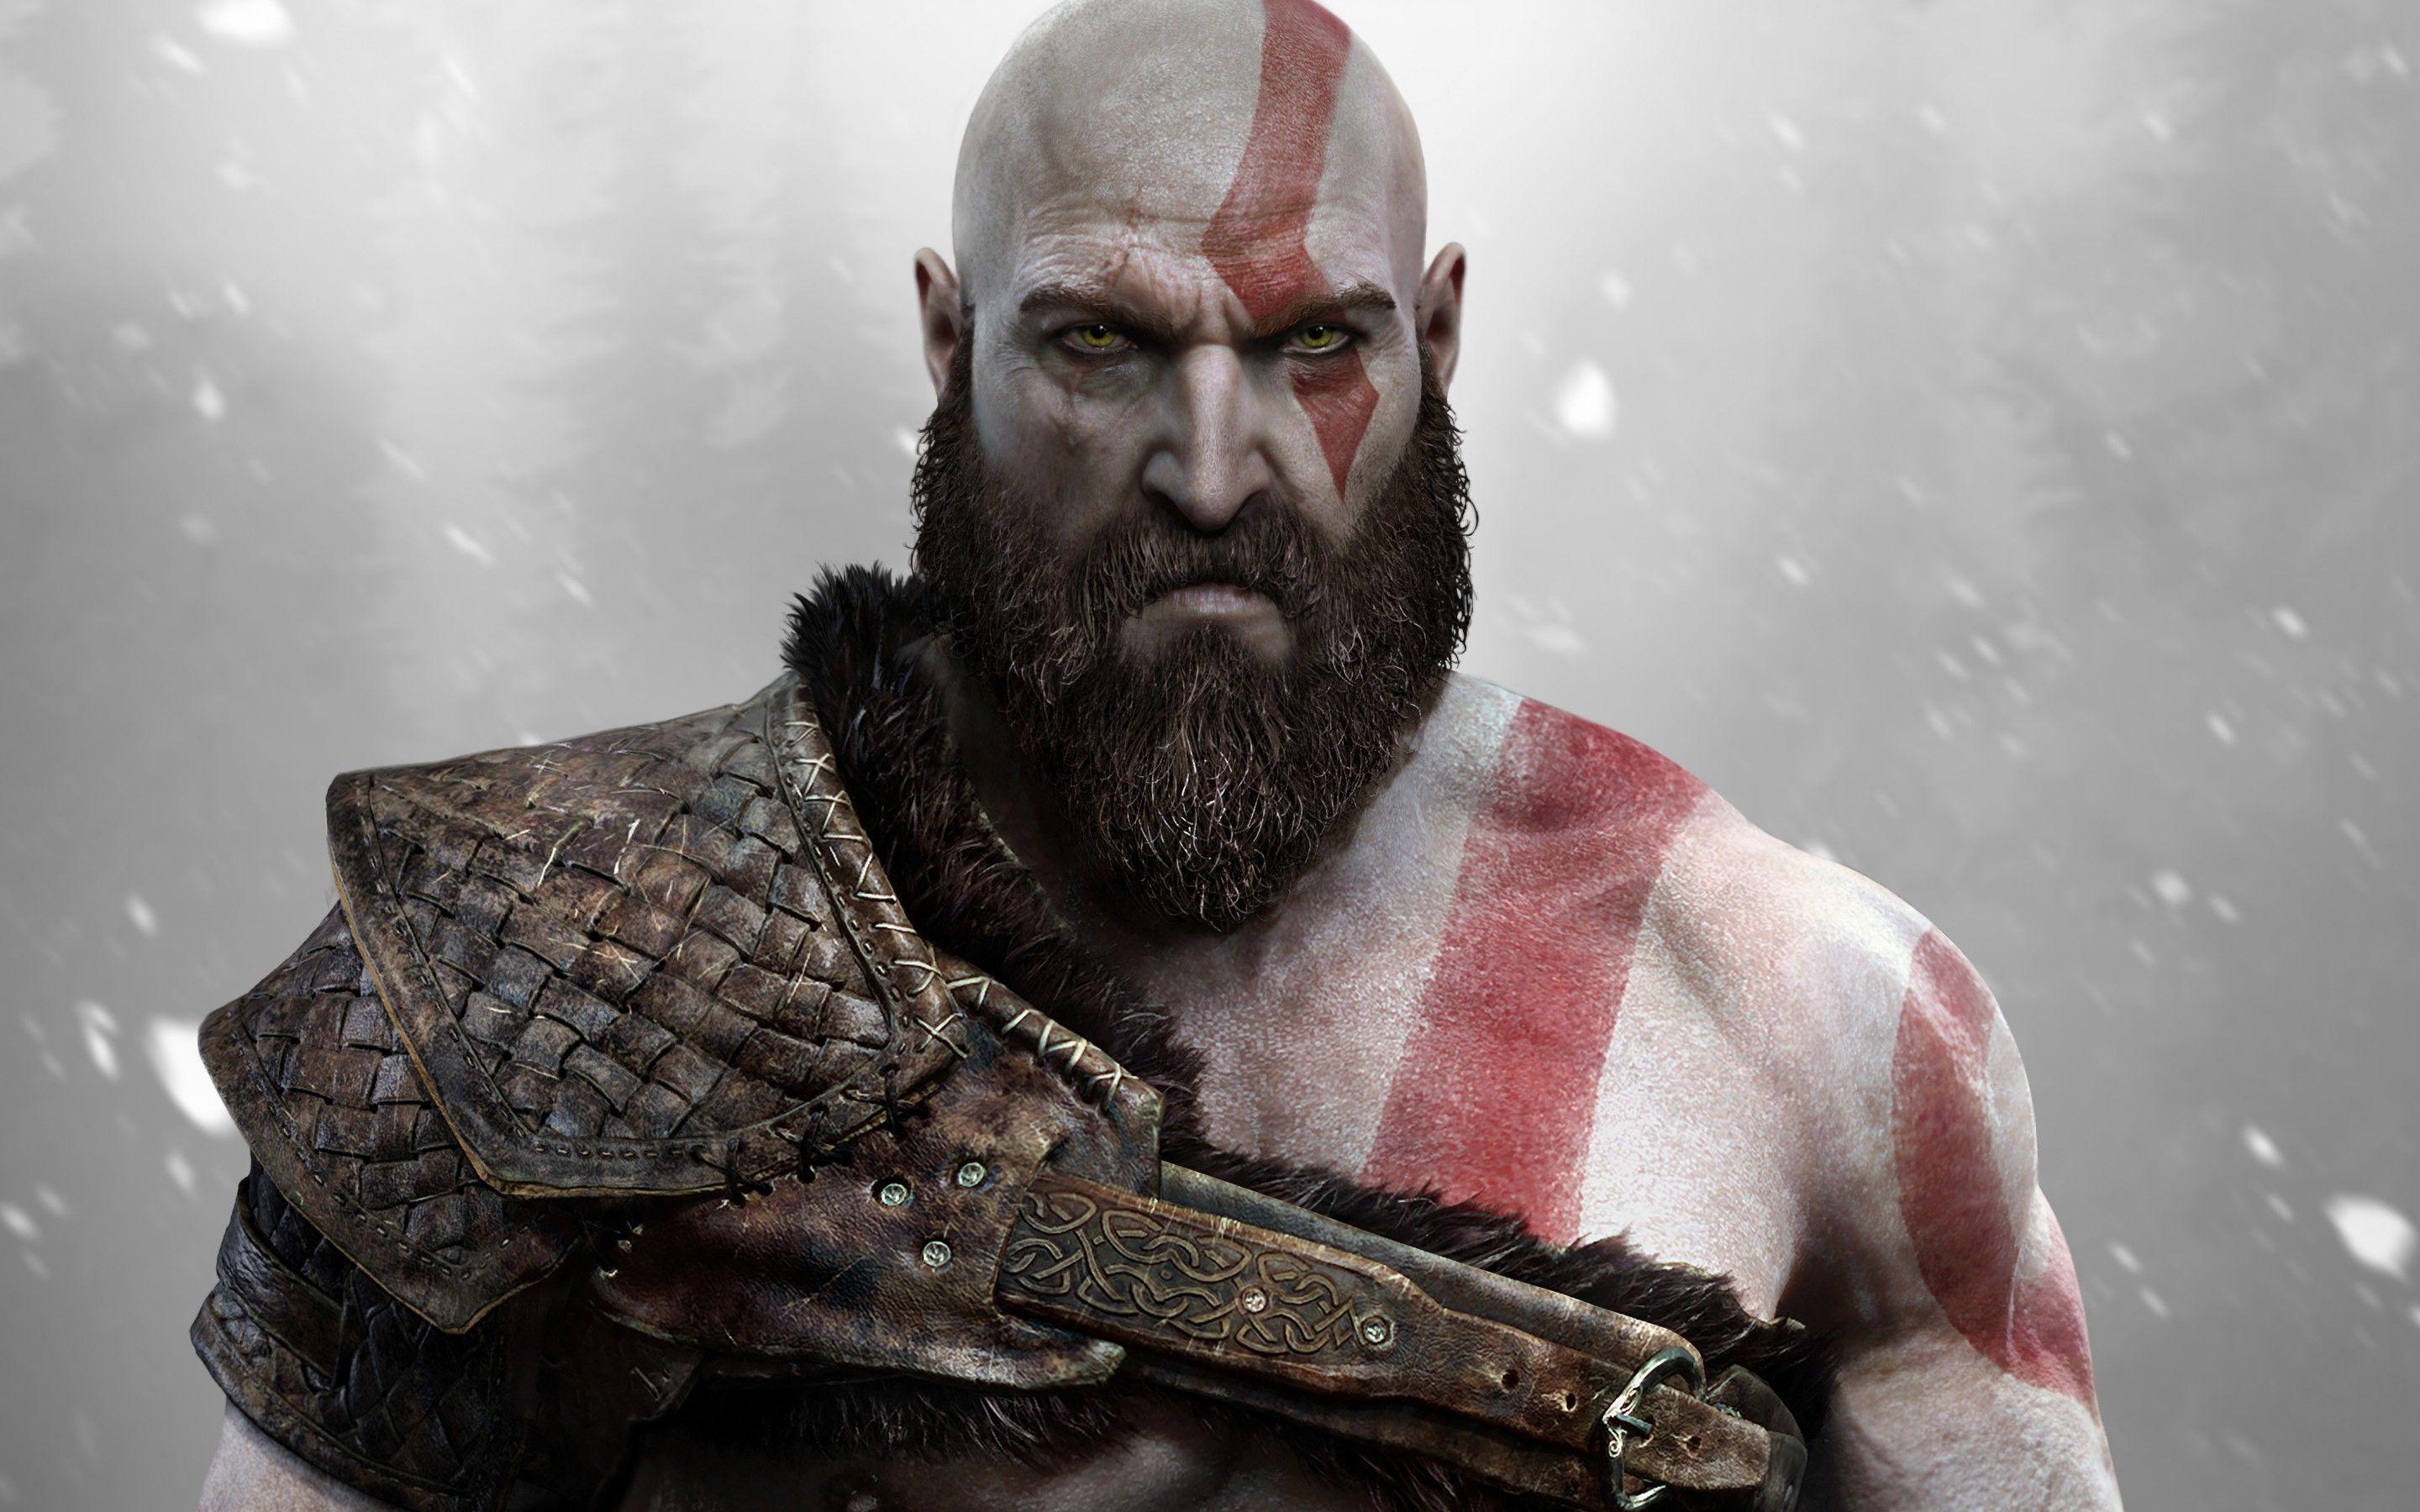 10+ Thor (God of War) HD Wallpapers and Backgrounds